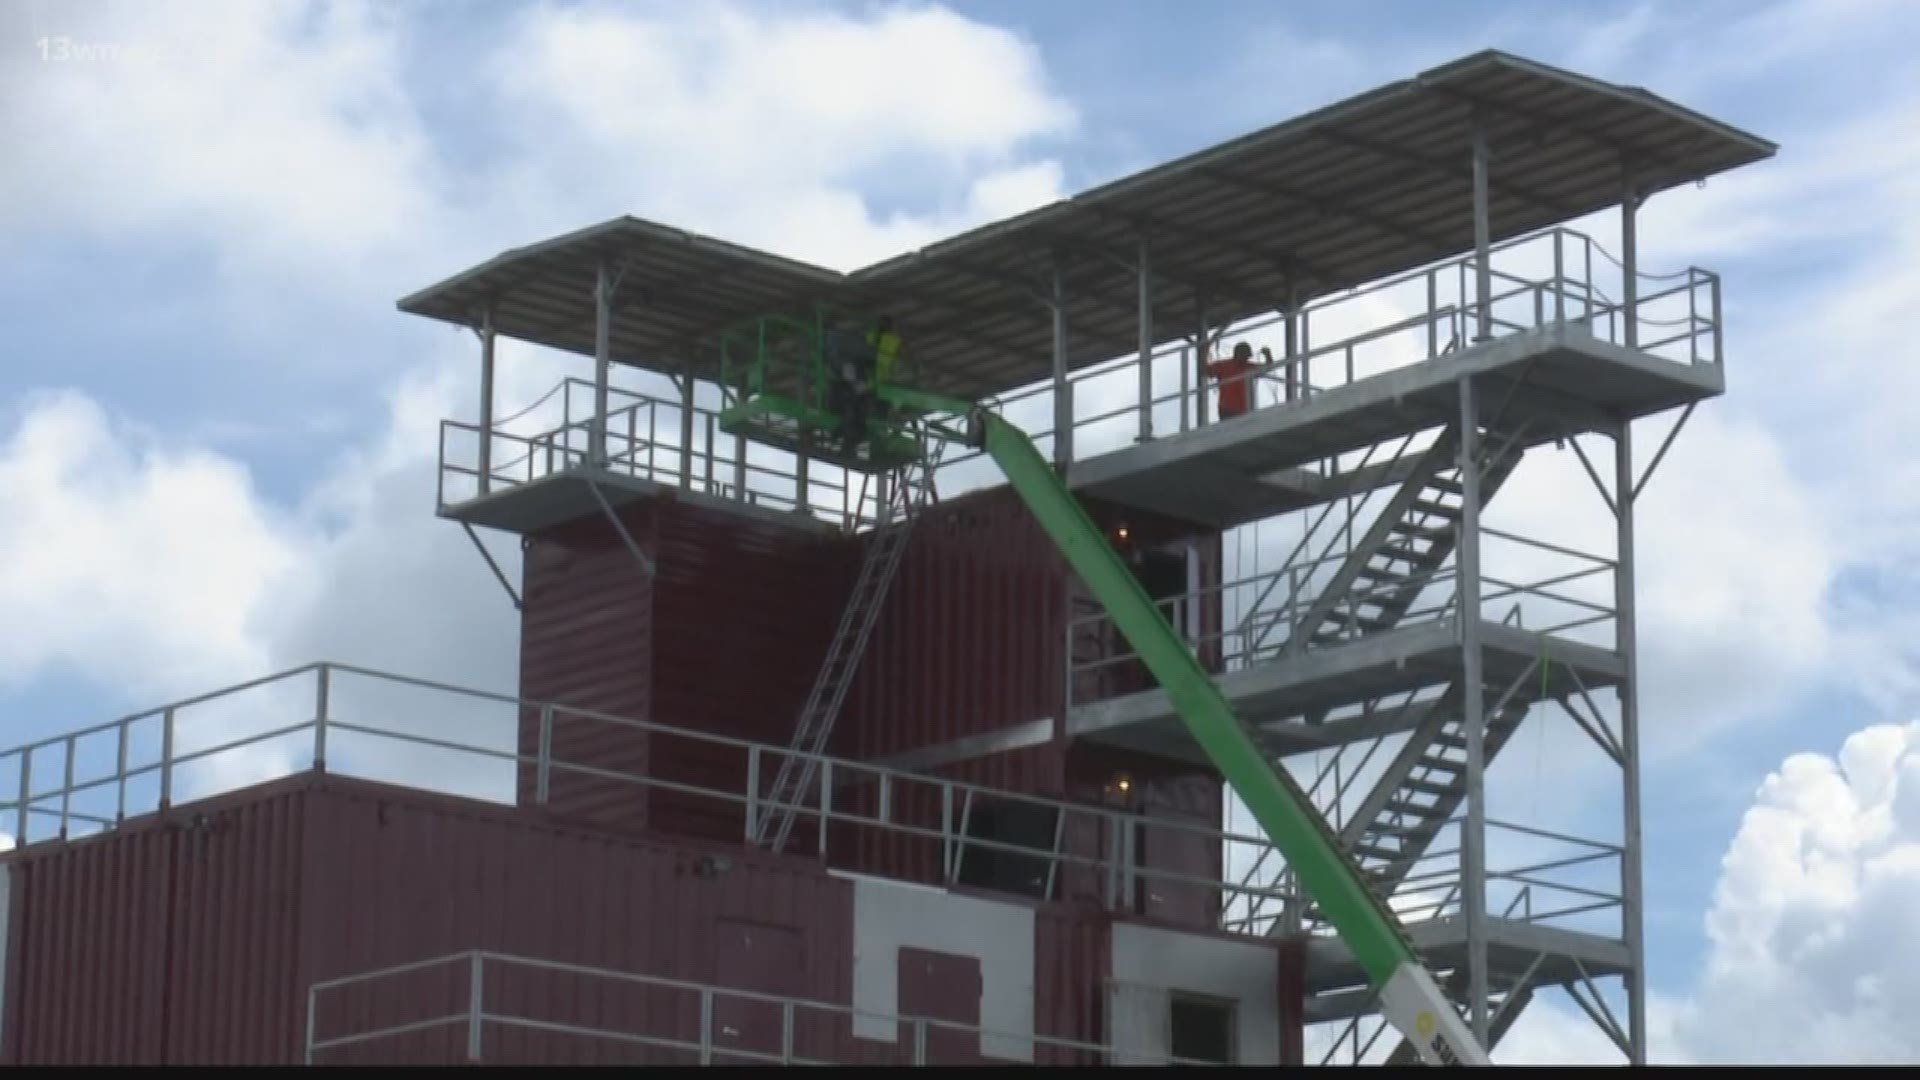 The Warner Robins Fire Department hopes a new training center will get firefighters better prepare for any scenario. The department hopes to start using the new tower within the next few months.